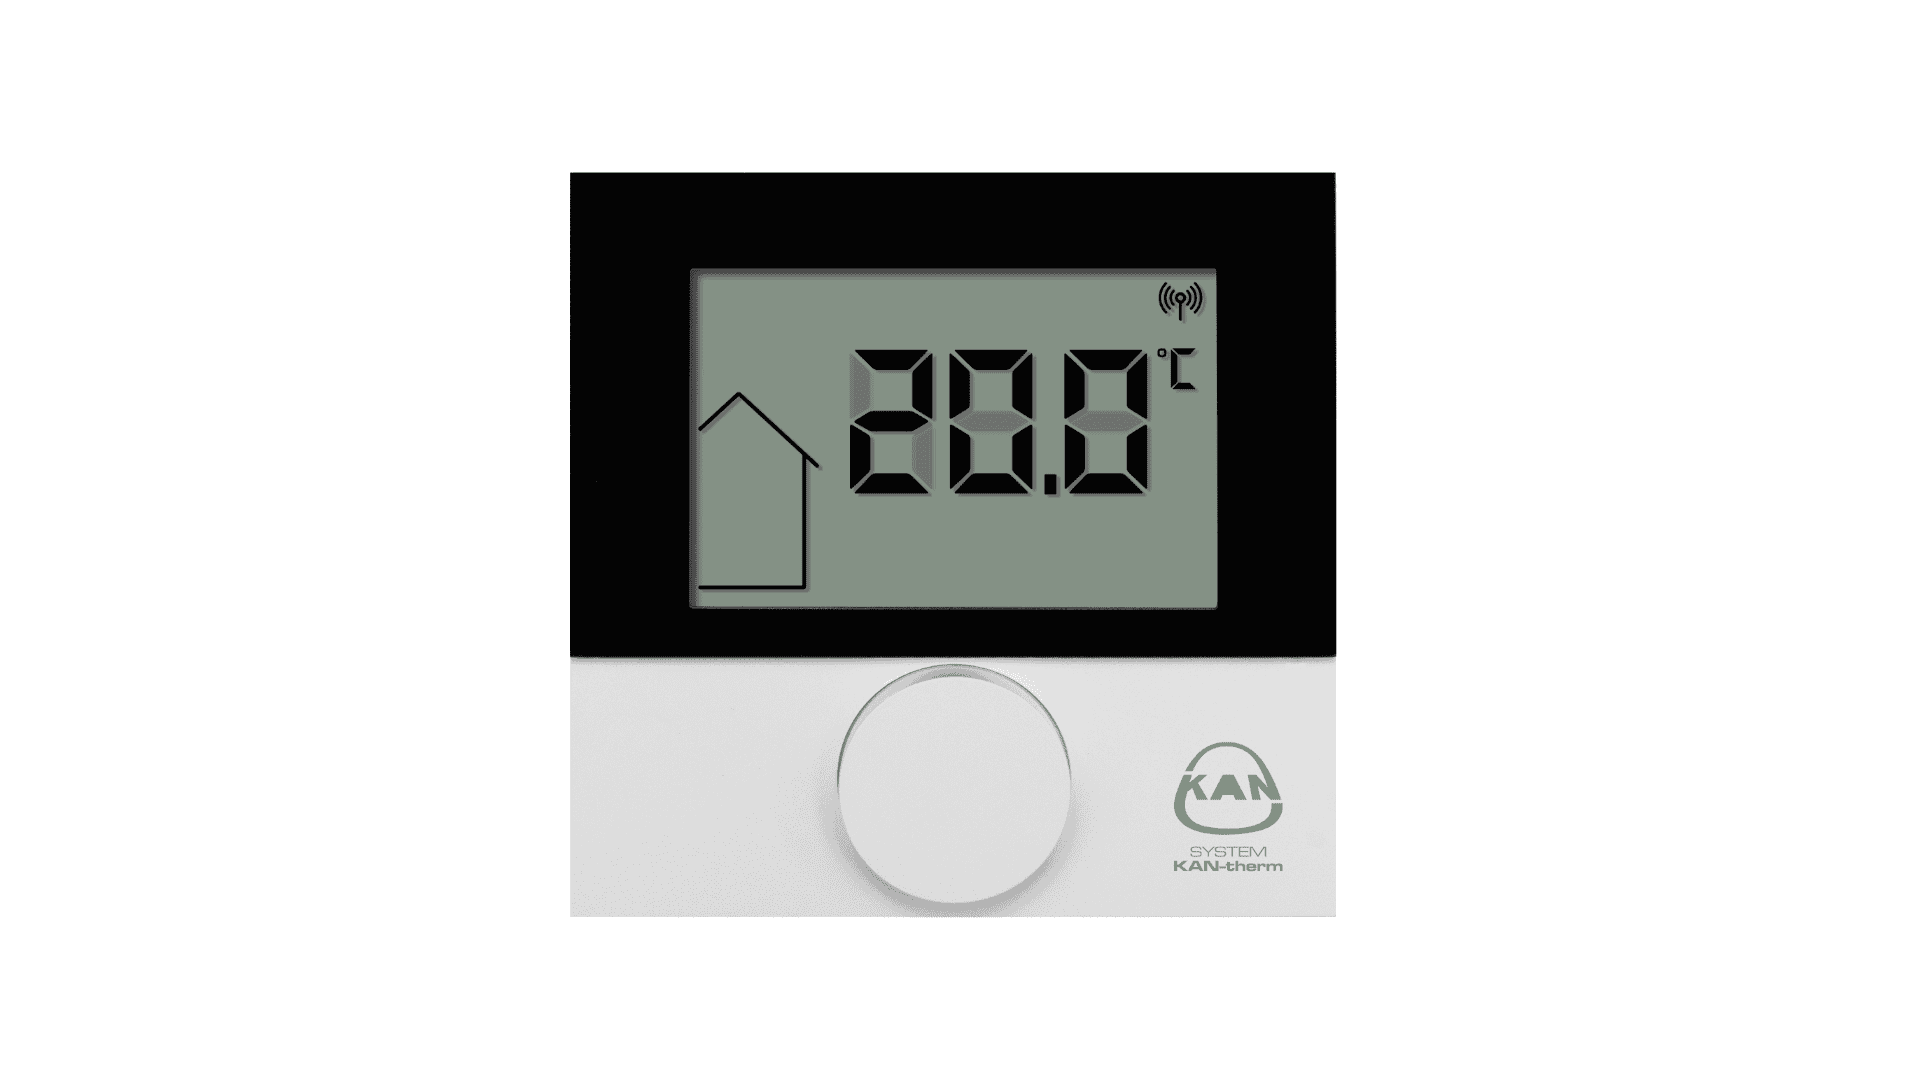 KAN-therm - Smart & Basic+-Automatik - Kabelloser Thermostat mit LCD